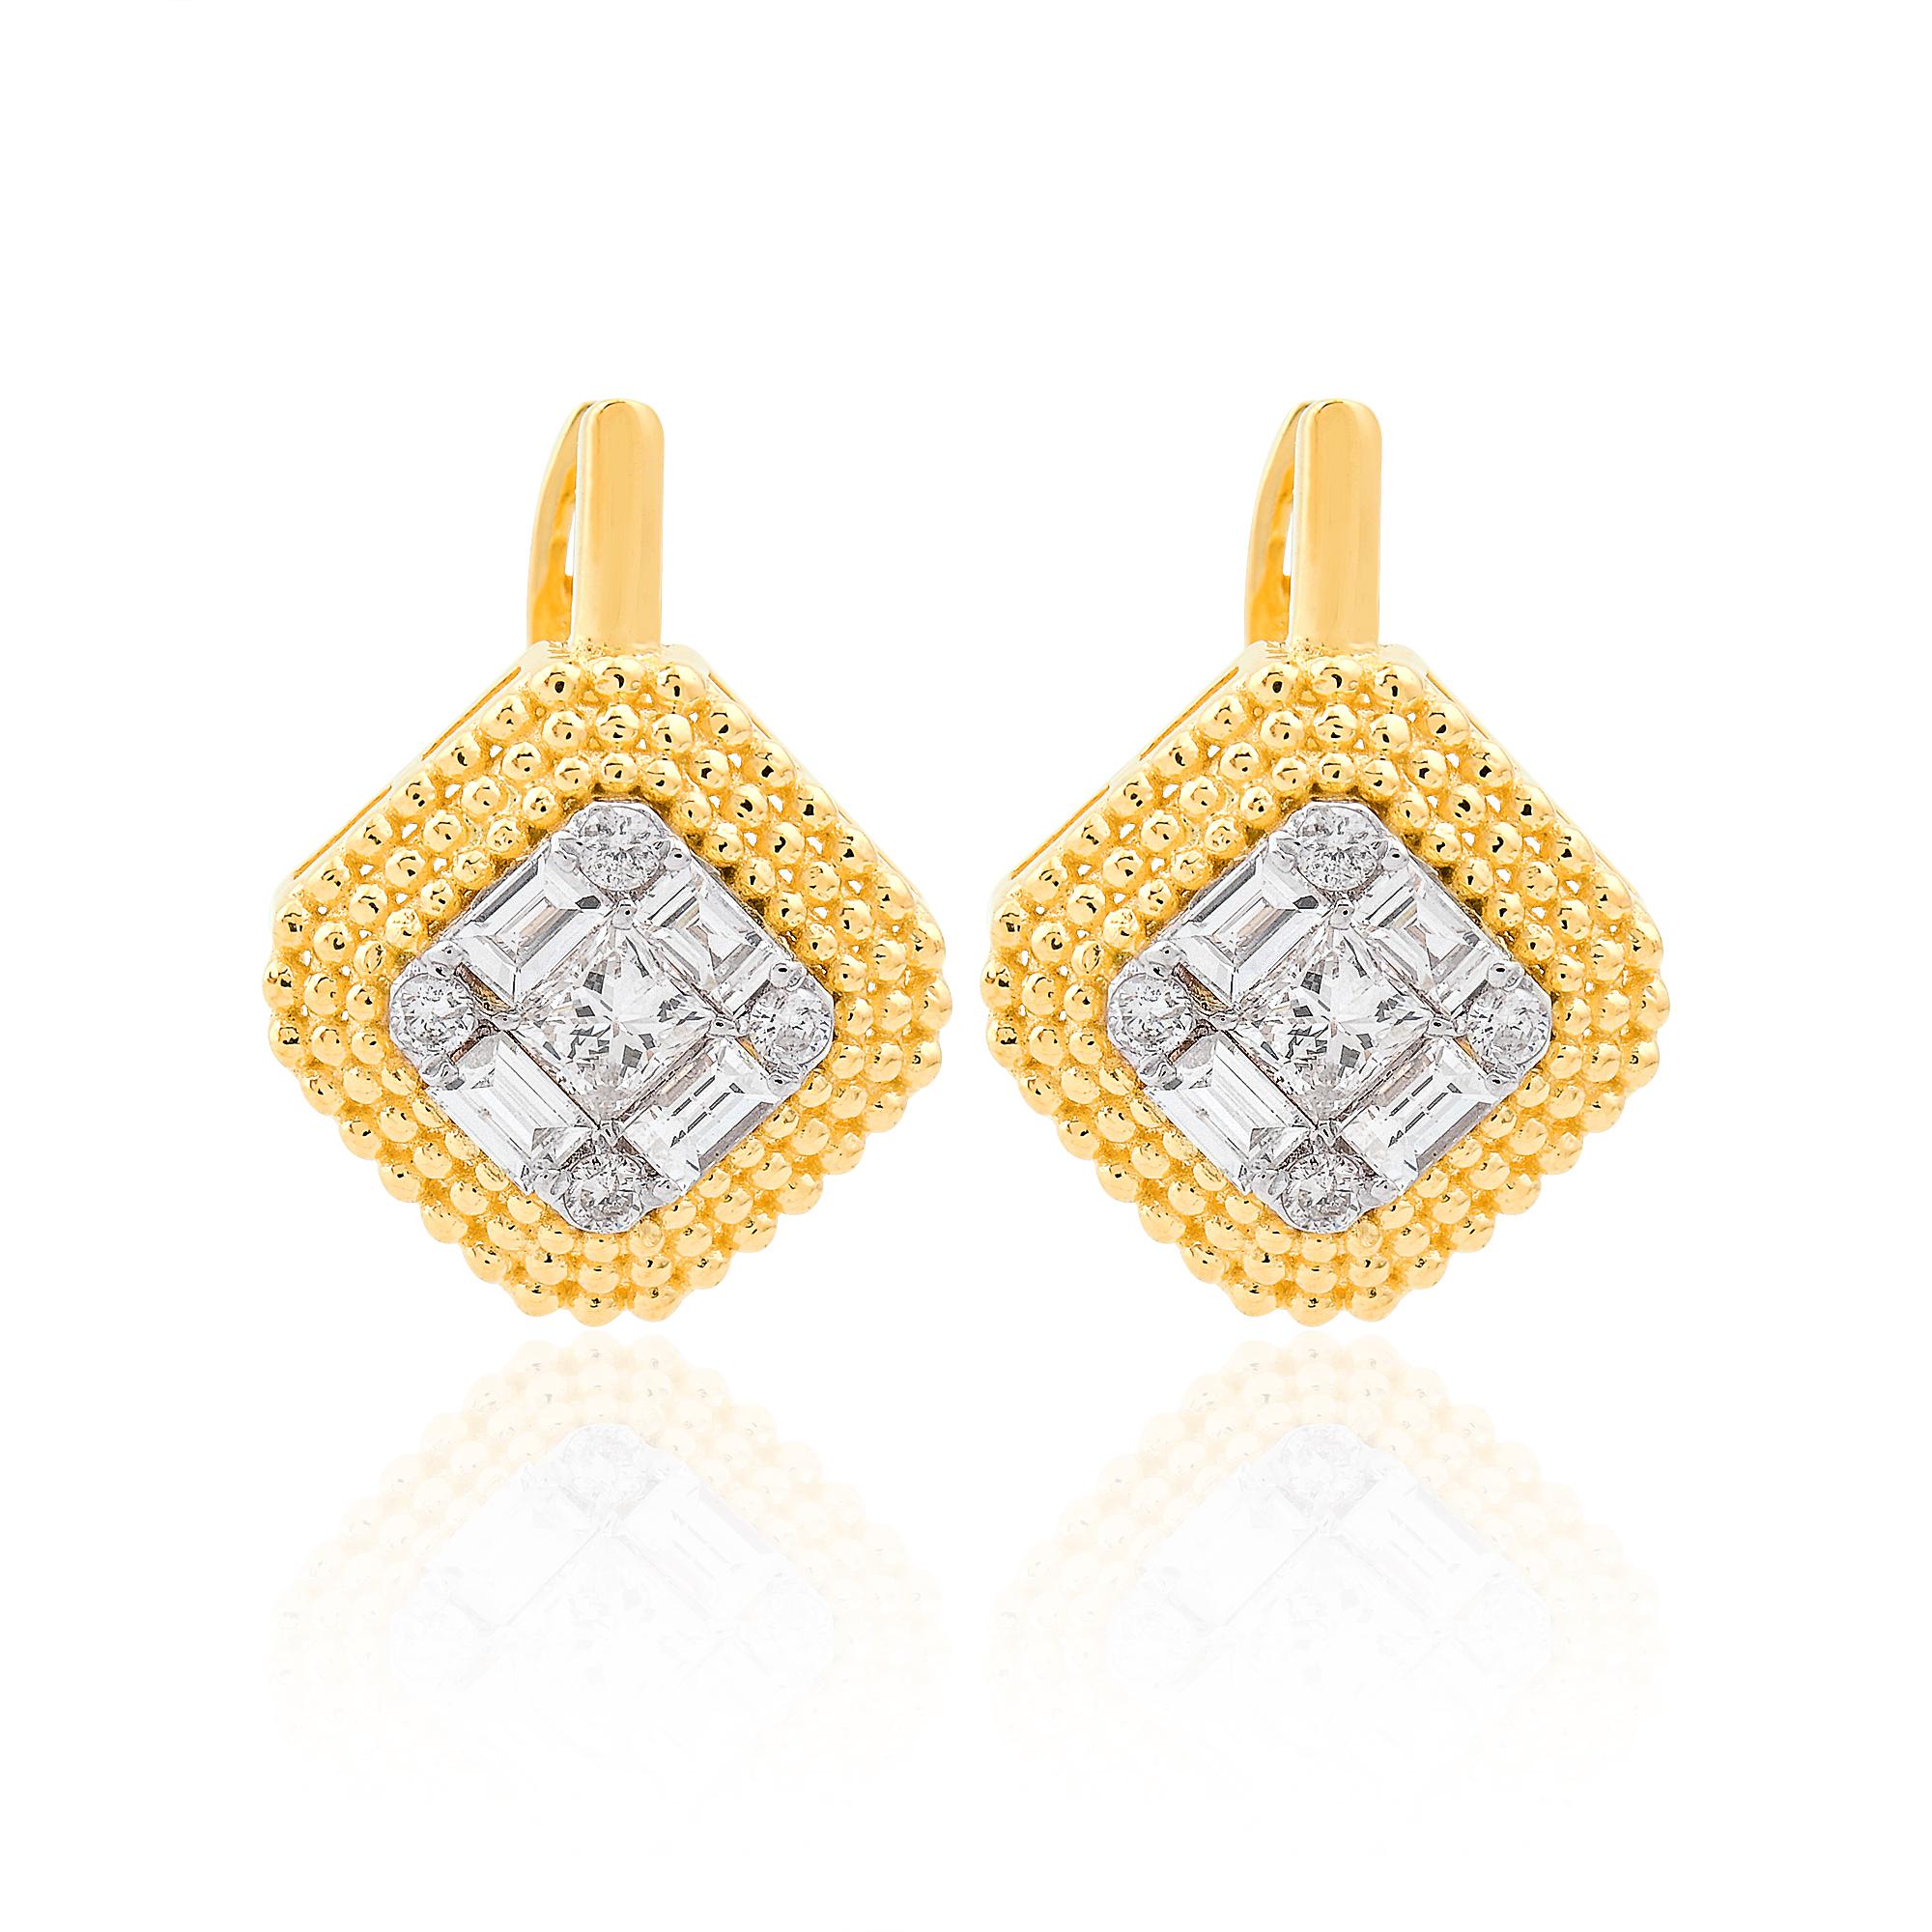 Item Code :- SEE-11646E
Gross Wt. :- 5.01 gm
18k Solid Yellow Gold Wt. :- 4.84 gm
Natural Diamond Wt. :- 0.87 Ct. ( AVERAGE DIAMOND CLARITY SI1-SI2 & COLOR H-I )
Earrings Size :- 16 mm approx.

✦ Sizing
.....................
We can adjust most items